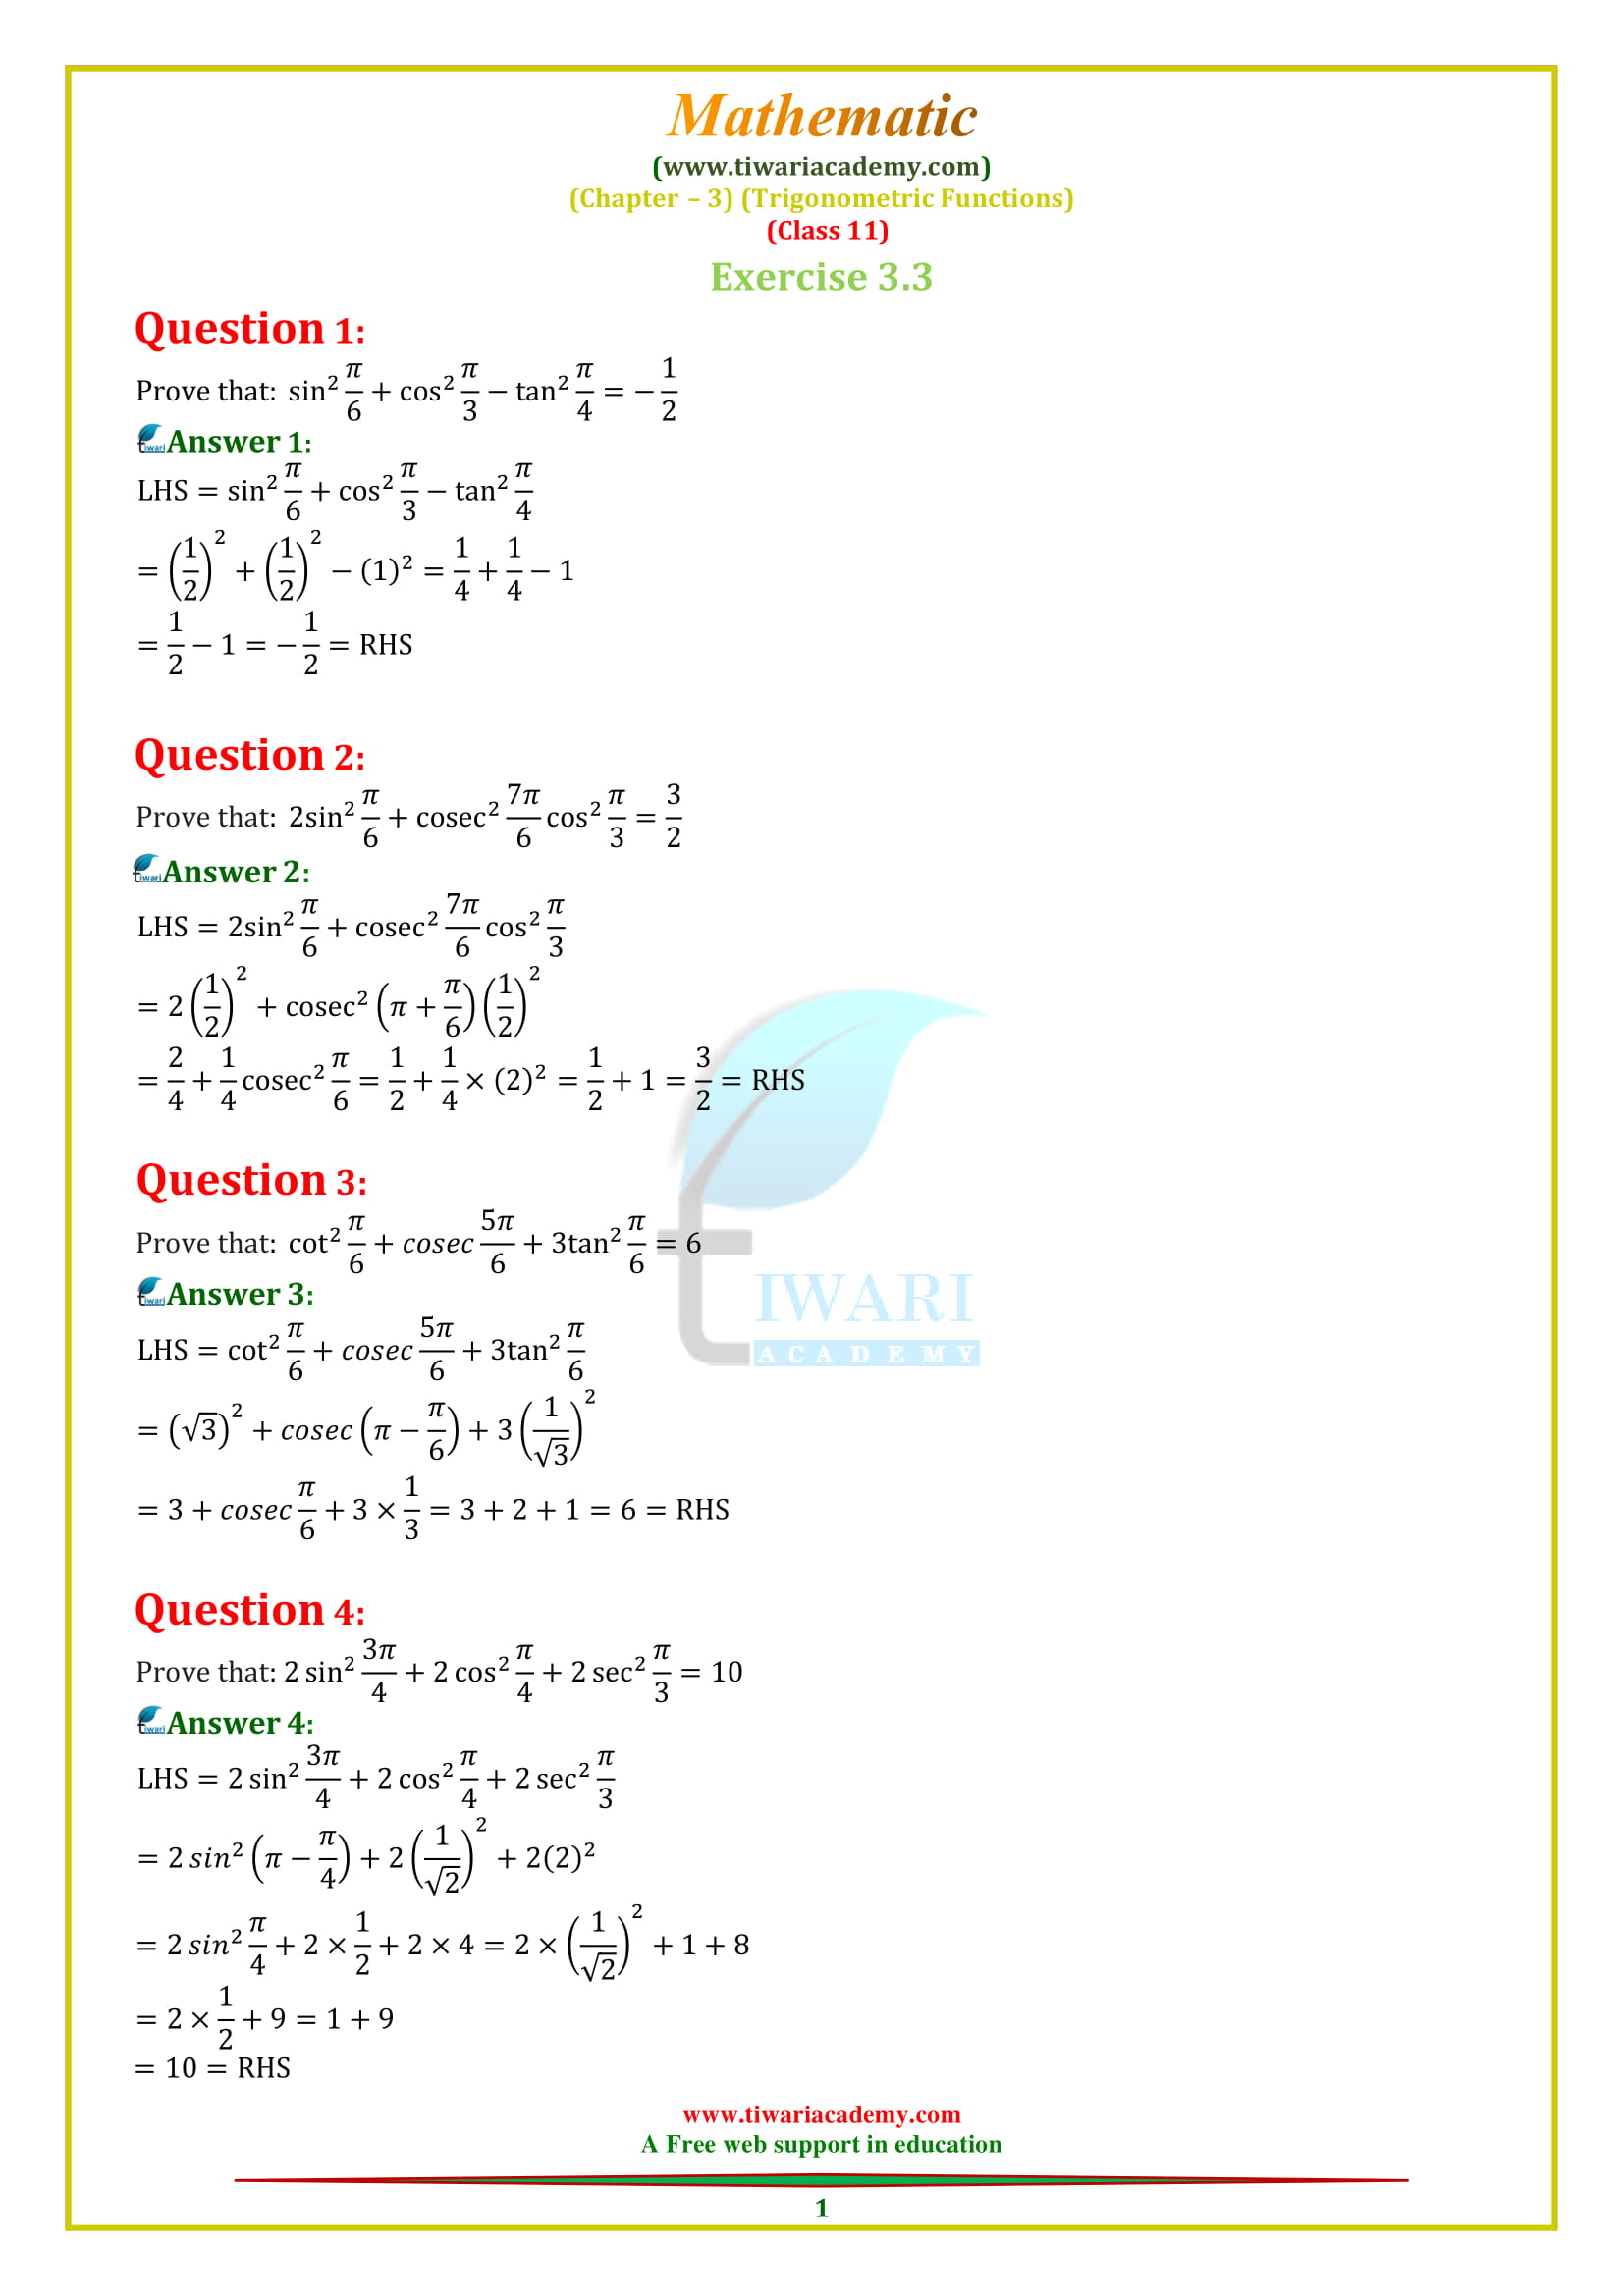 11 Maths Chapter 3 Exercise 3.3 solutions in English